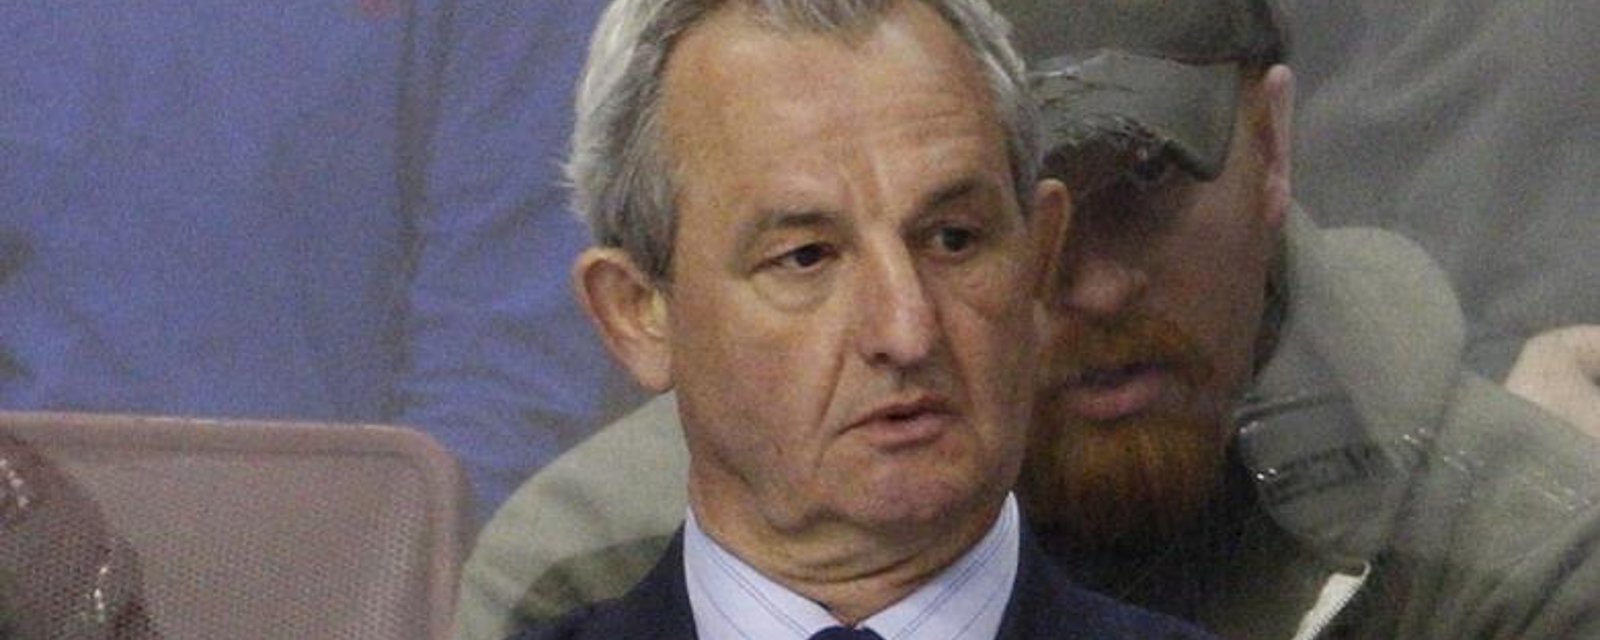 Darryl Sutter re-signs after receiving significant raise.